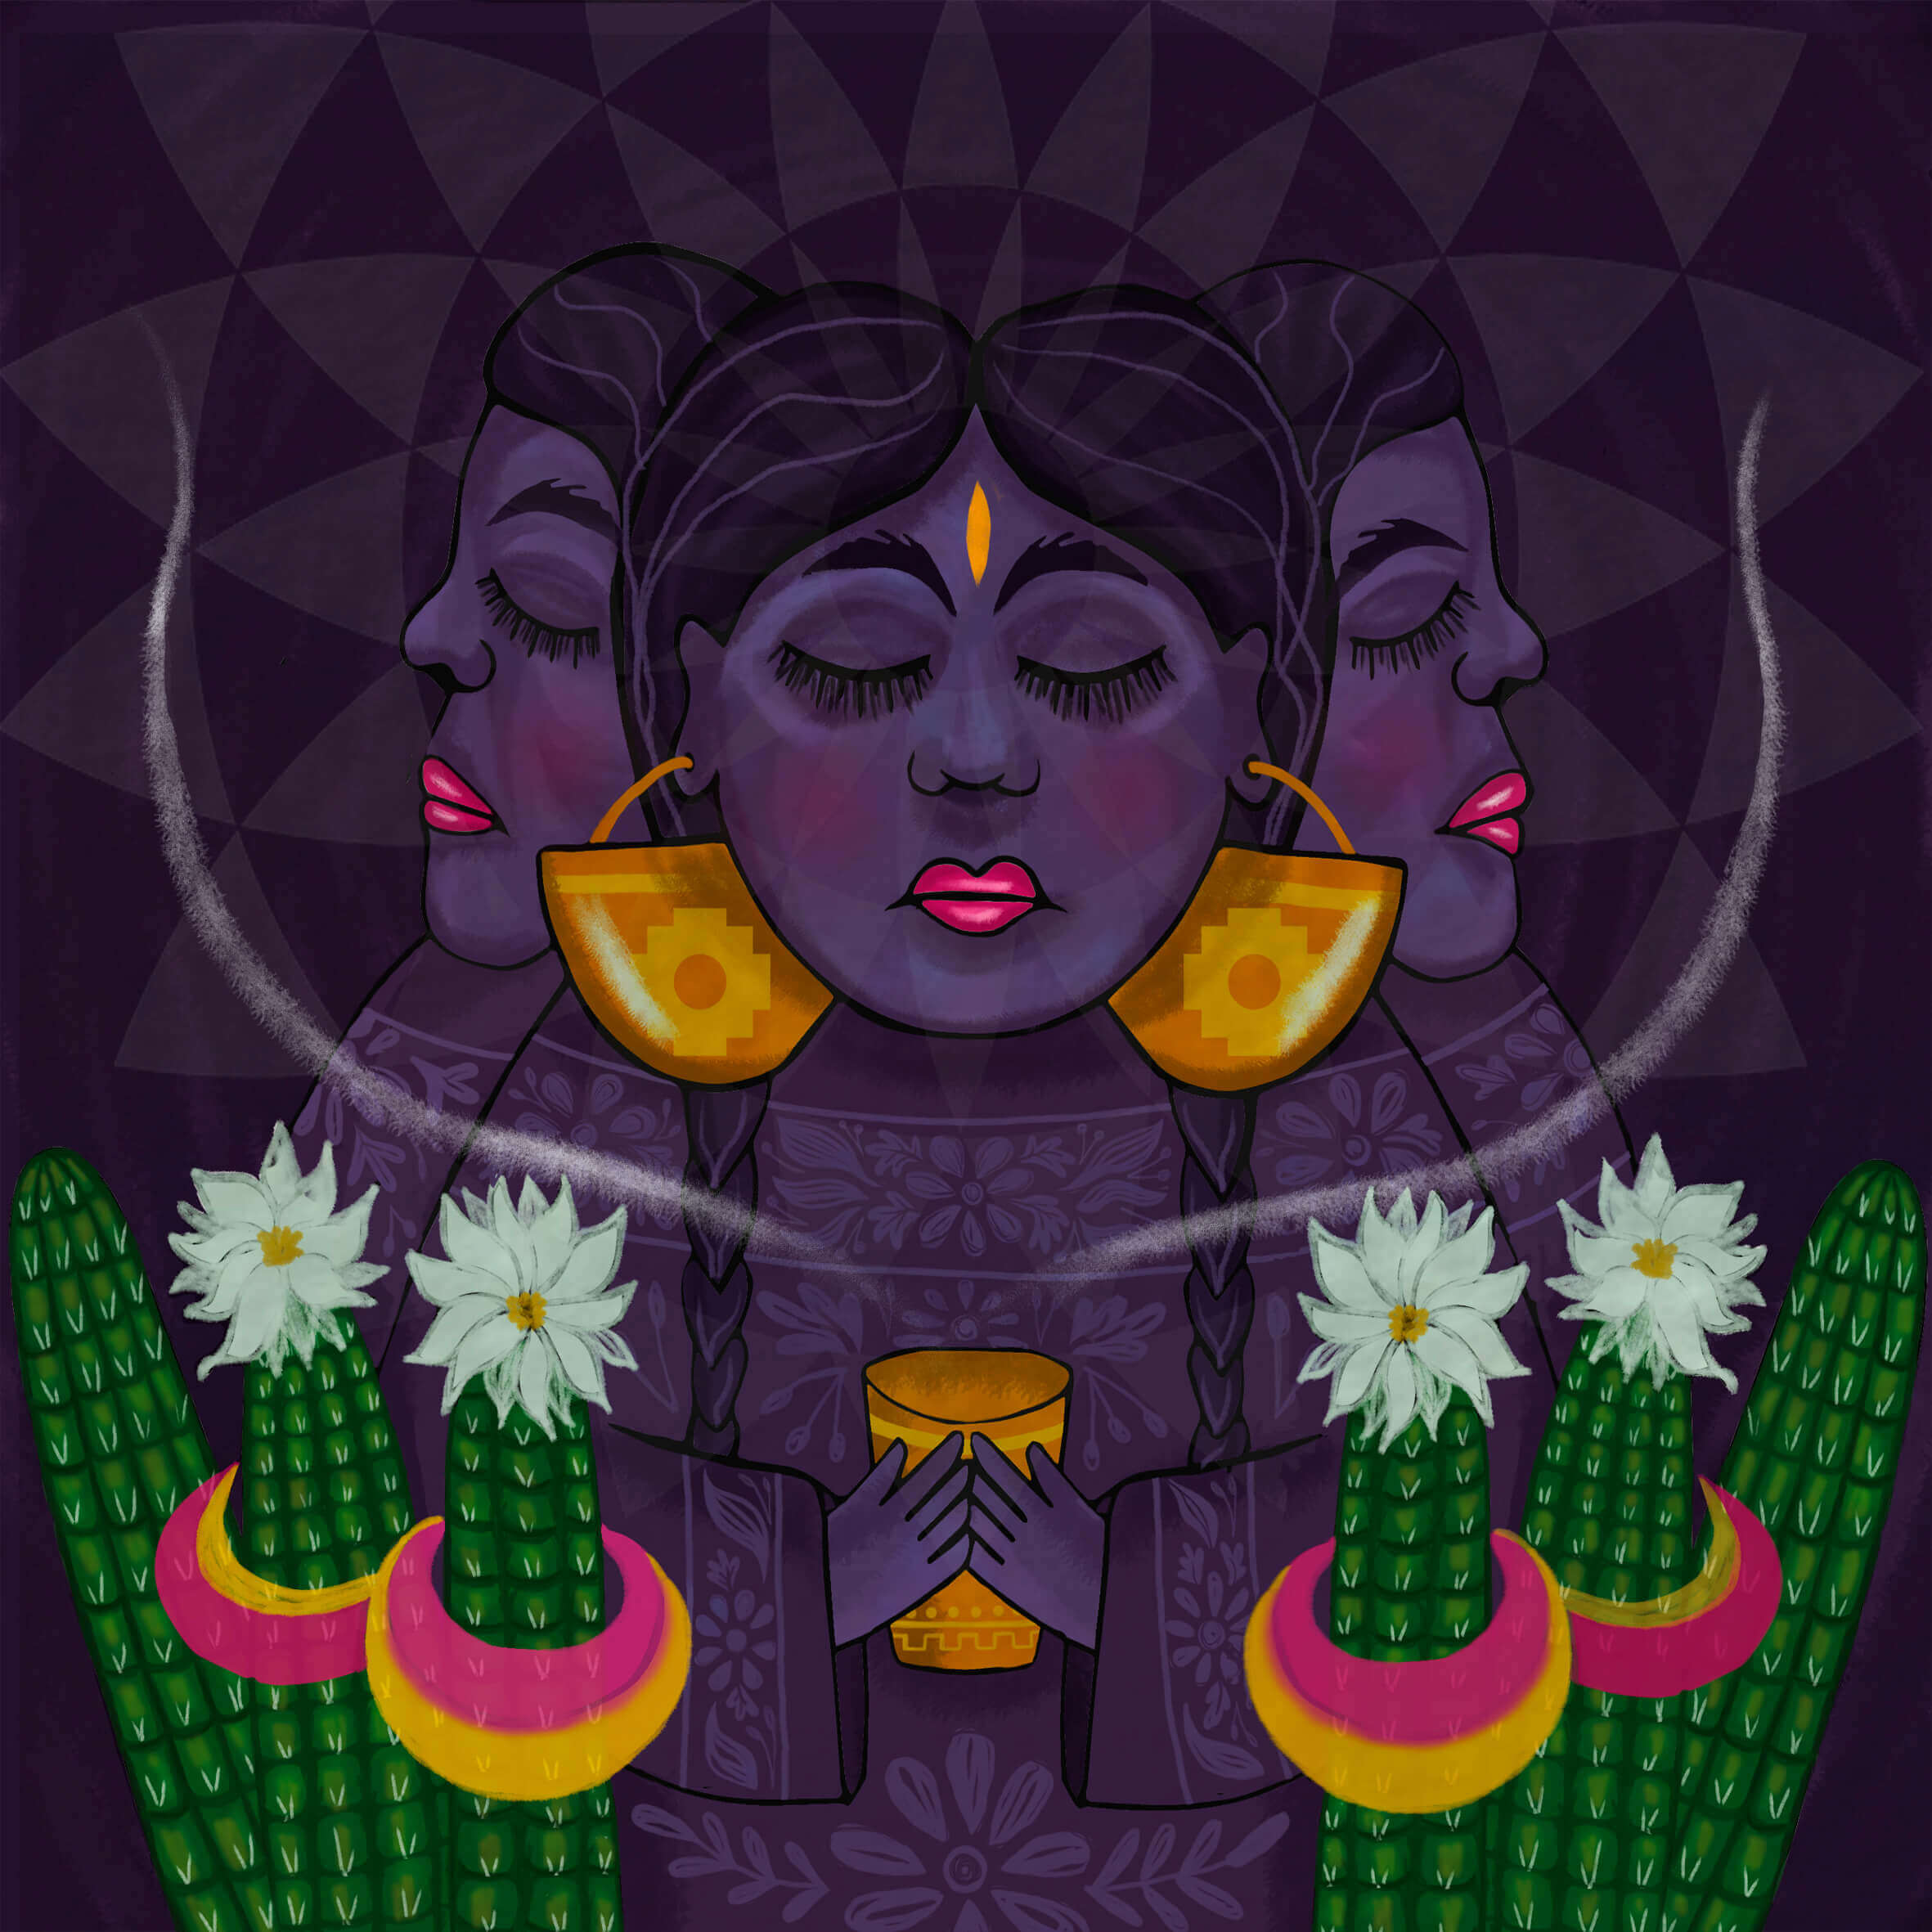 Three faces of women drawn in purple and black are surrounded by bright green cactuses.